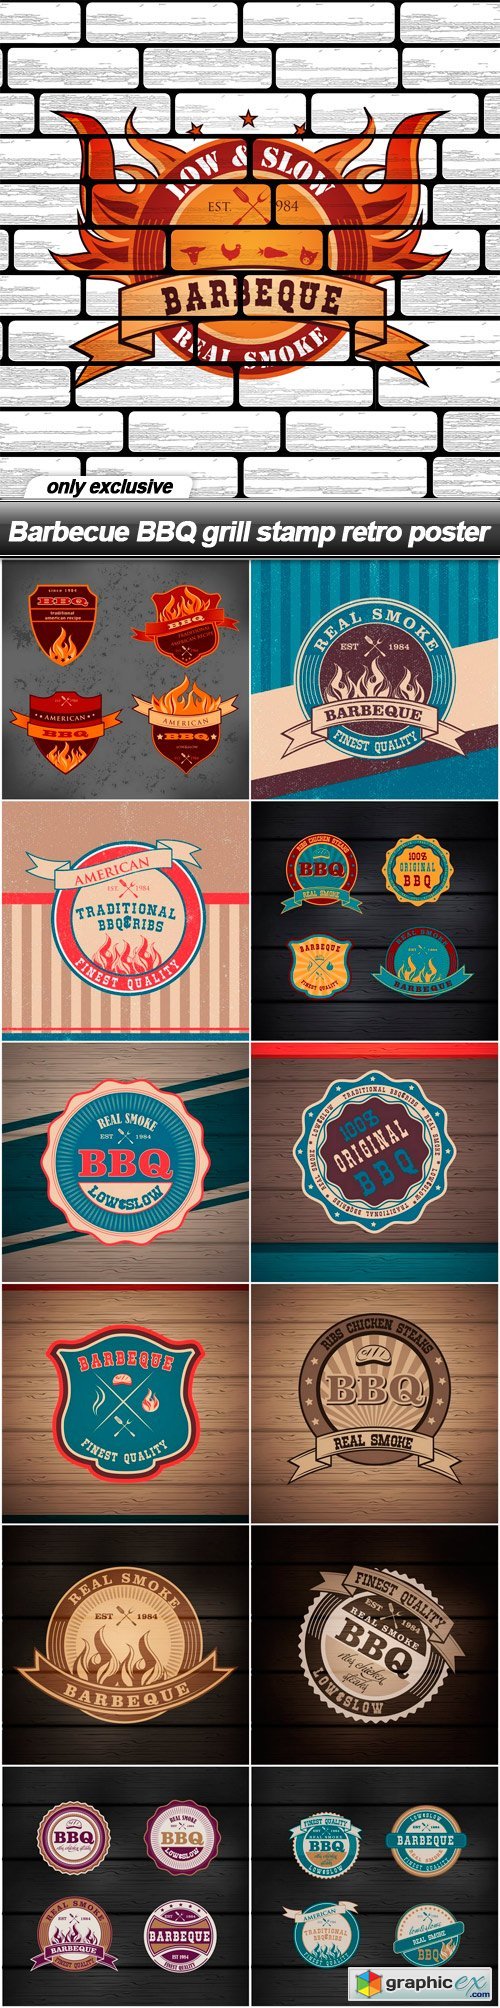 Barbecue BBQ grill stamp retro poster - 13 EPS